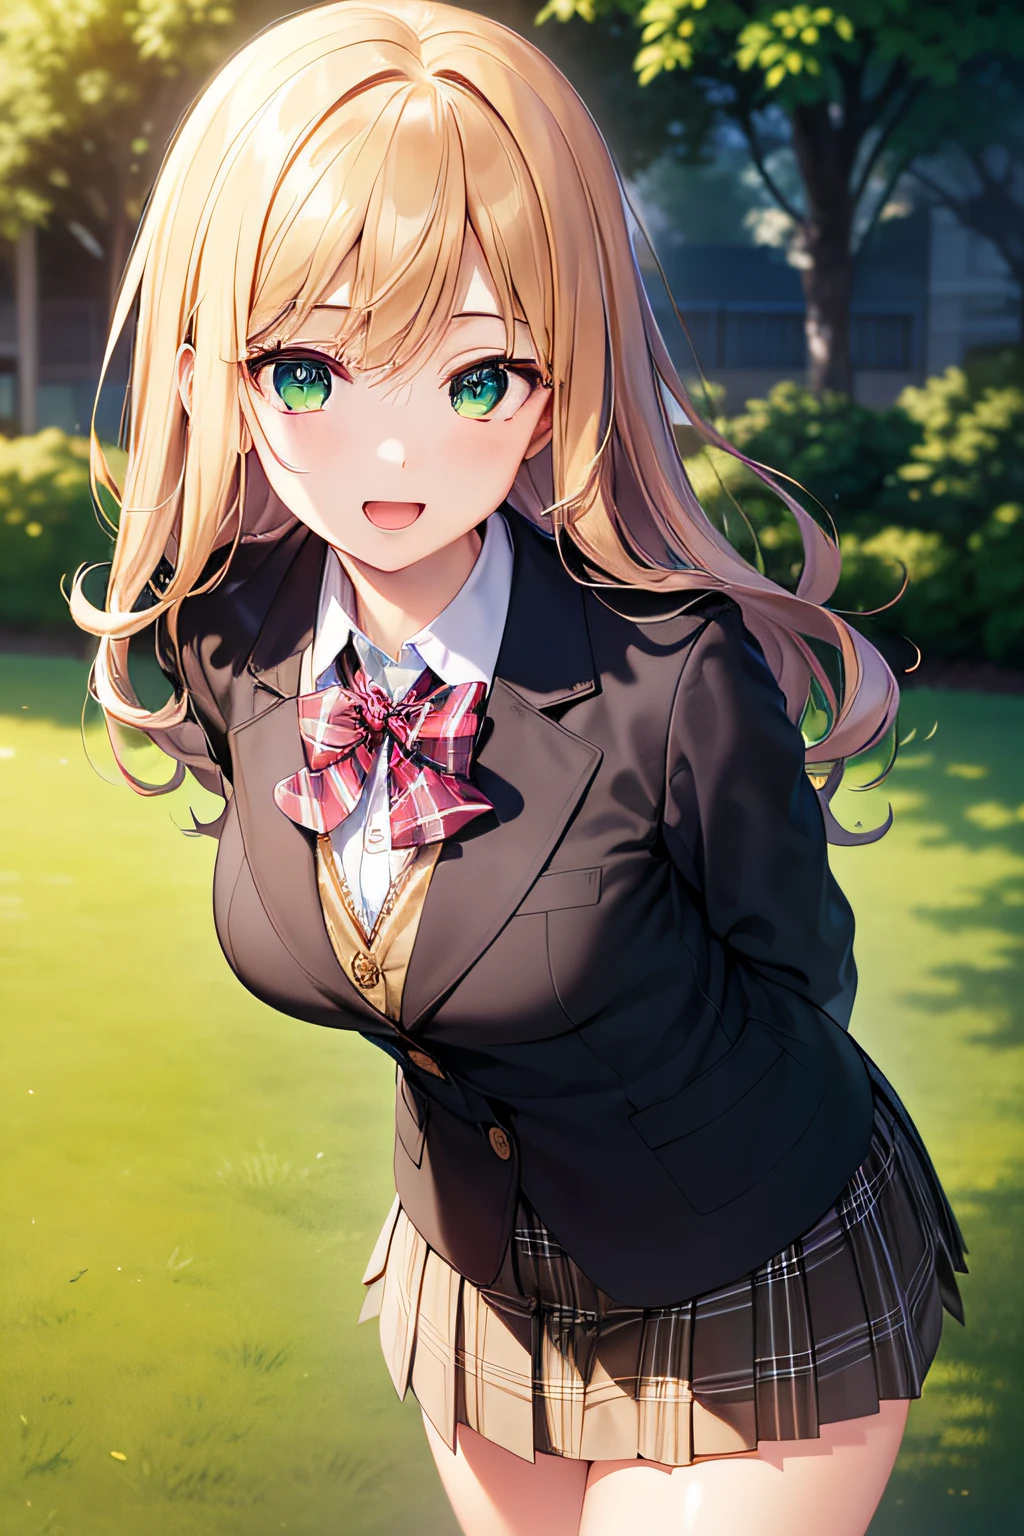 ((masutepiece, Best Quality, hight resolution, nffsw, Perfect Pixel, depth of fields, 4K, nffsw, nffsw))), 1girl in, Single, Solo, Beautiful anime girl, Beautiful Art Style, Anime Character, ((Long hair, Bangs, dark brown hair, Curly hair:0.8)), ((Green eyes:1.4, Detailed eyes, Beautiful eyes, Perfect eyes,Curly eyelashes, Realistic eyes)), ((Detailed face, Blushing:1.2)), ((Smooth texture:0.75, Realistic texture:0.5, Anime CG style)), medium breasts, Dynamic Angle, busty, Perfect body, Dynamic Pose, ((red bowtie, , Black jacket, Open jacket, Brown cardigan, White shirt, Black skirt, plaid skirts)), Smile, Open mouth, arms behind back, Leaning forward, Amulment Park, ((close up, POV, Cute, Shoot in the face))